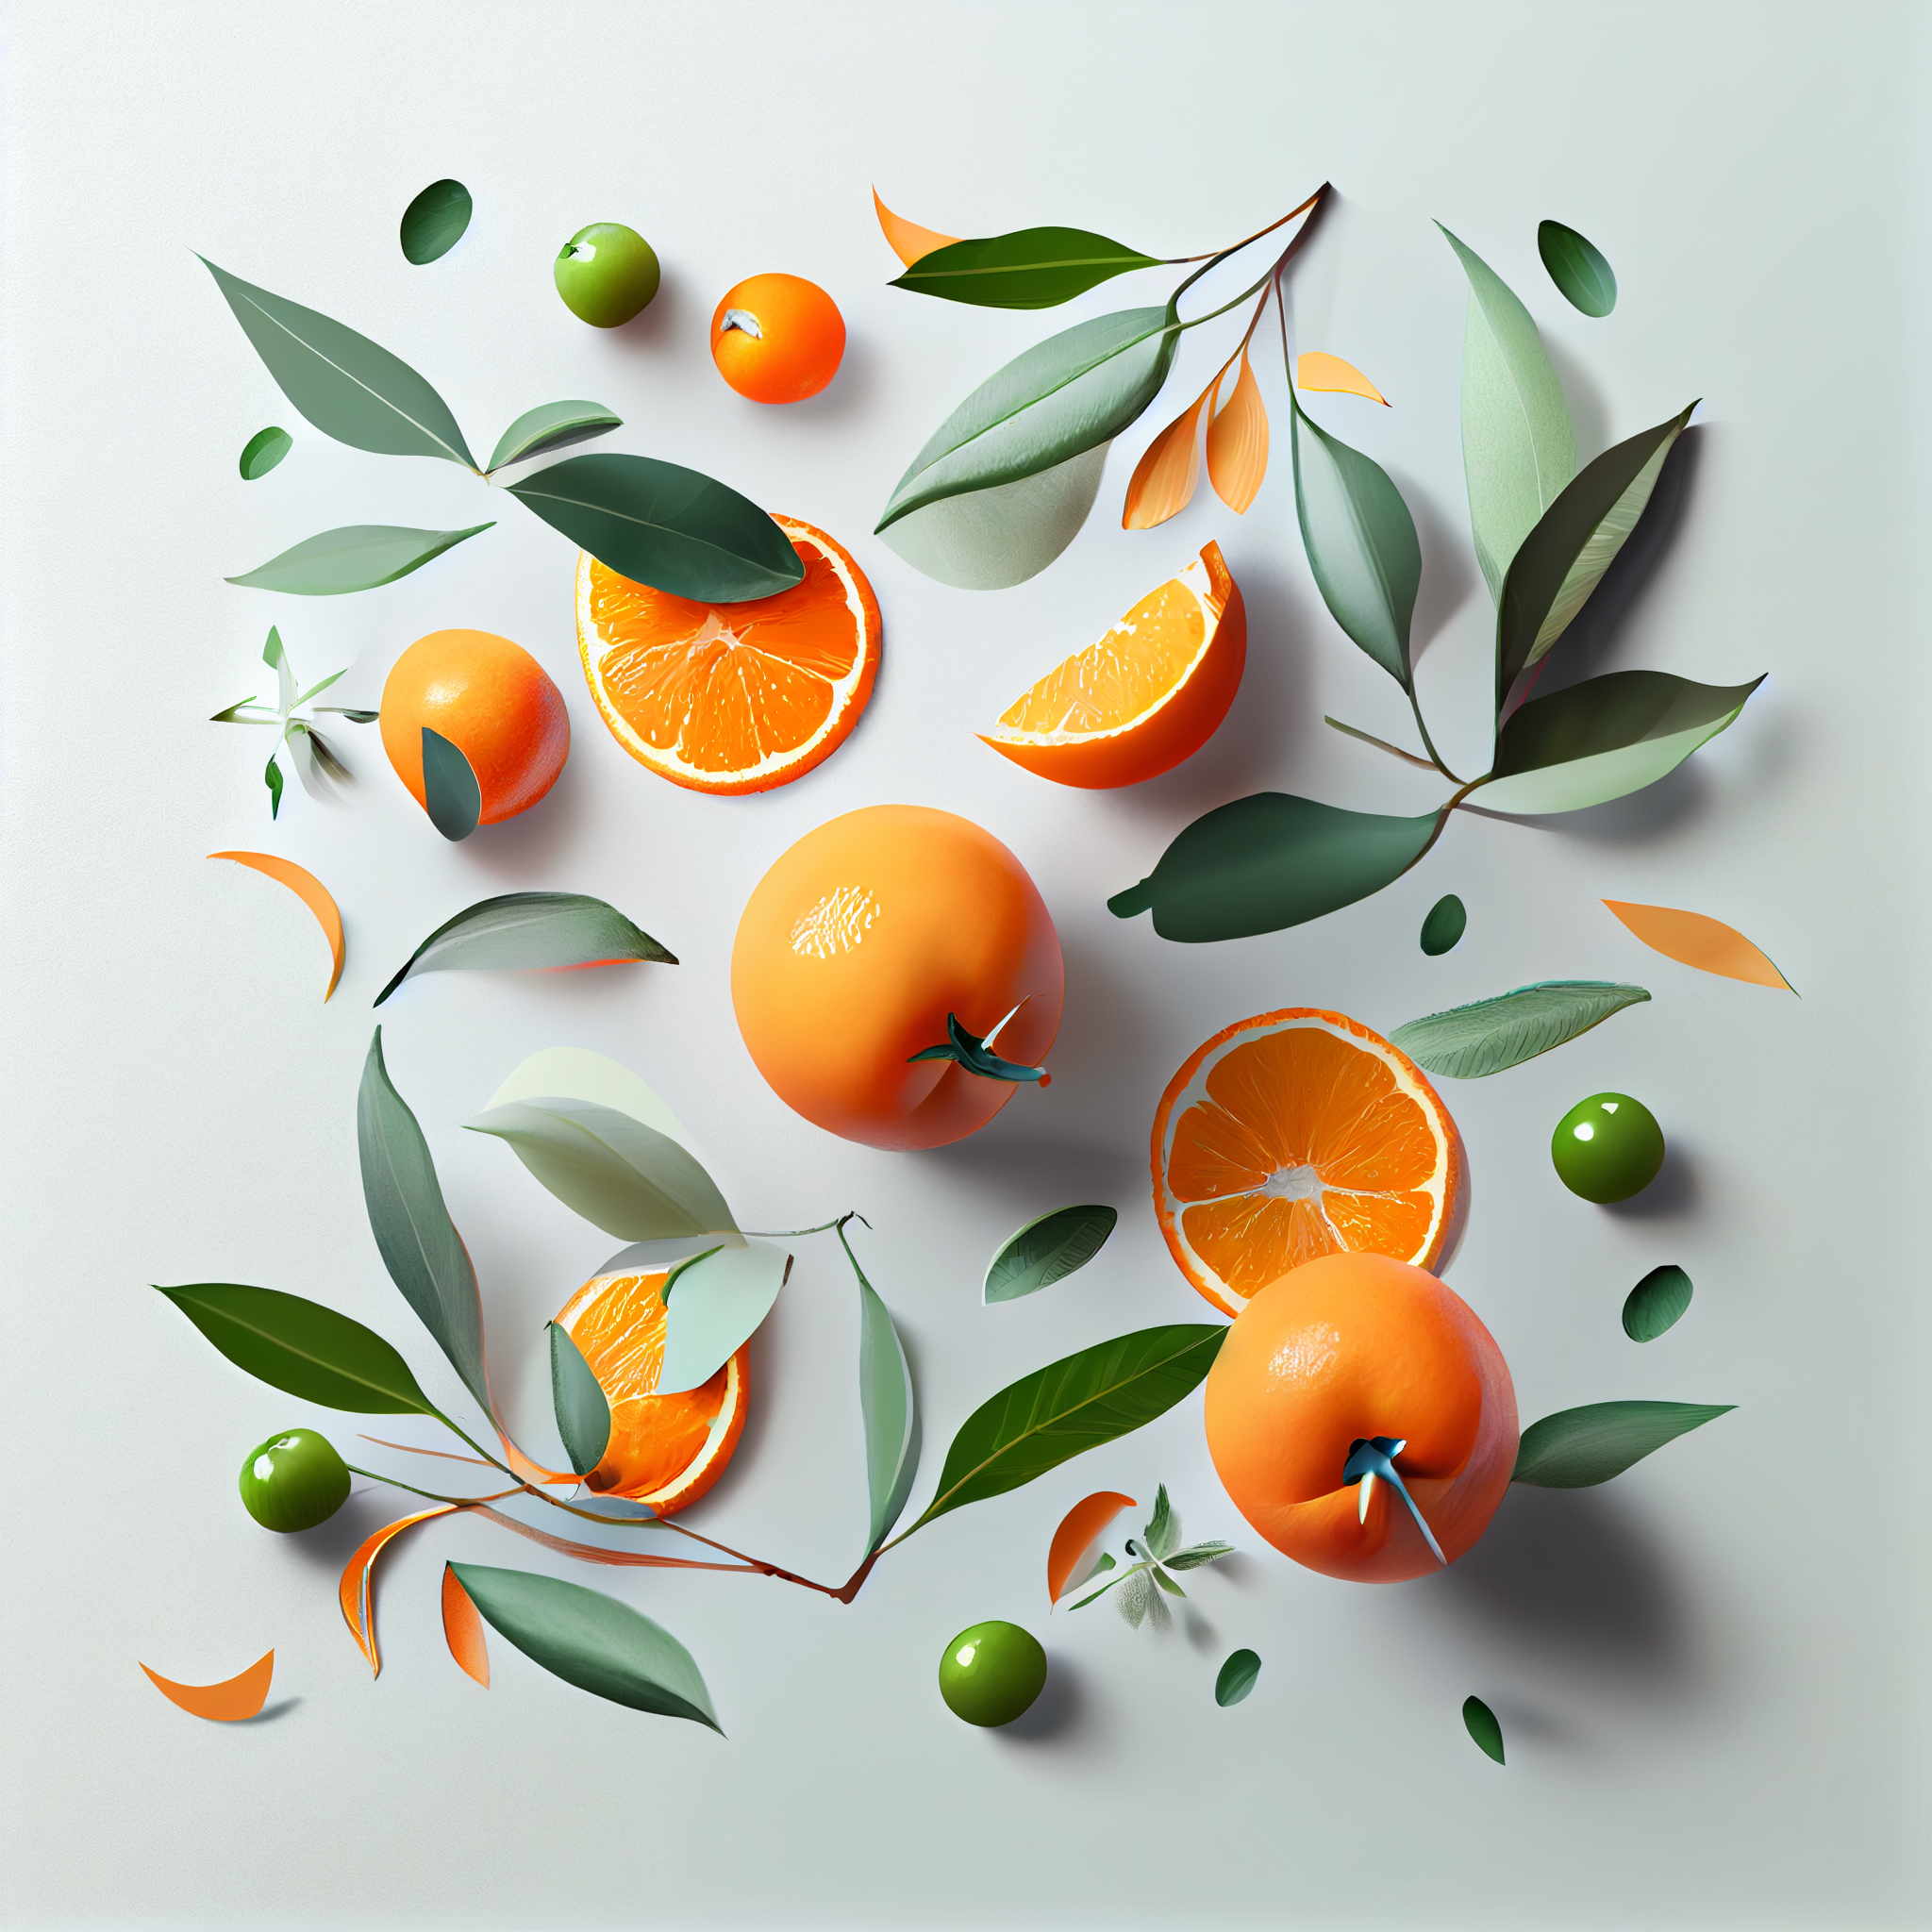 Citrus Medley: Oil Color Print of Oranges, Clementines, and Green Leaves on Light Grey Background